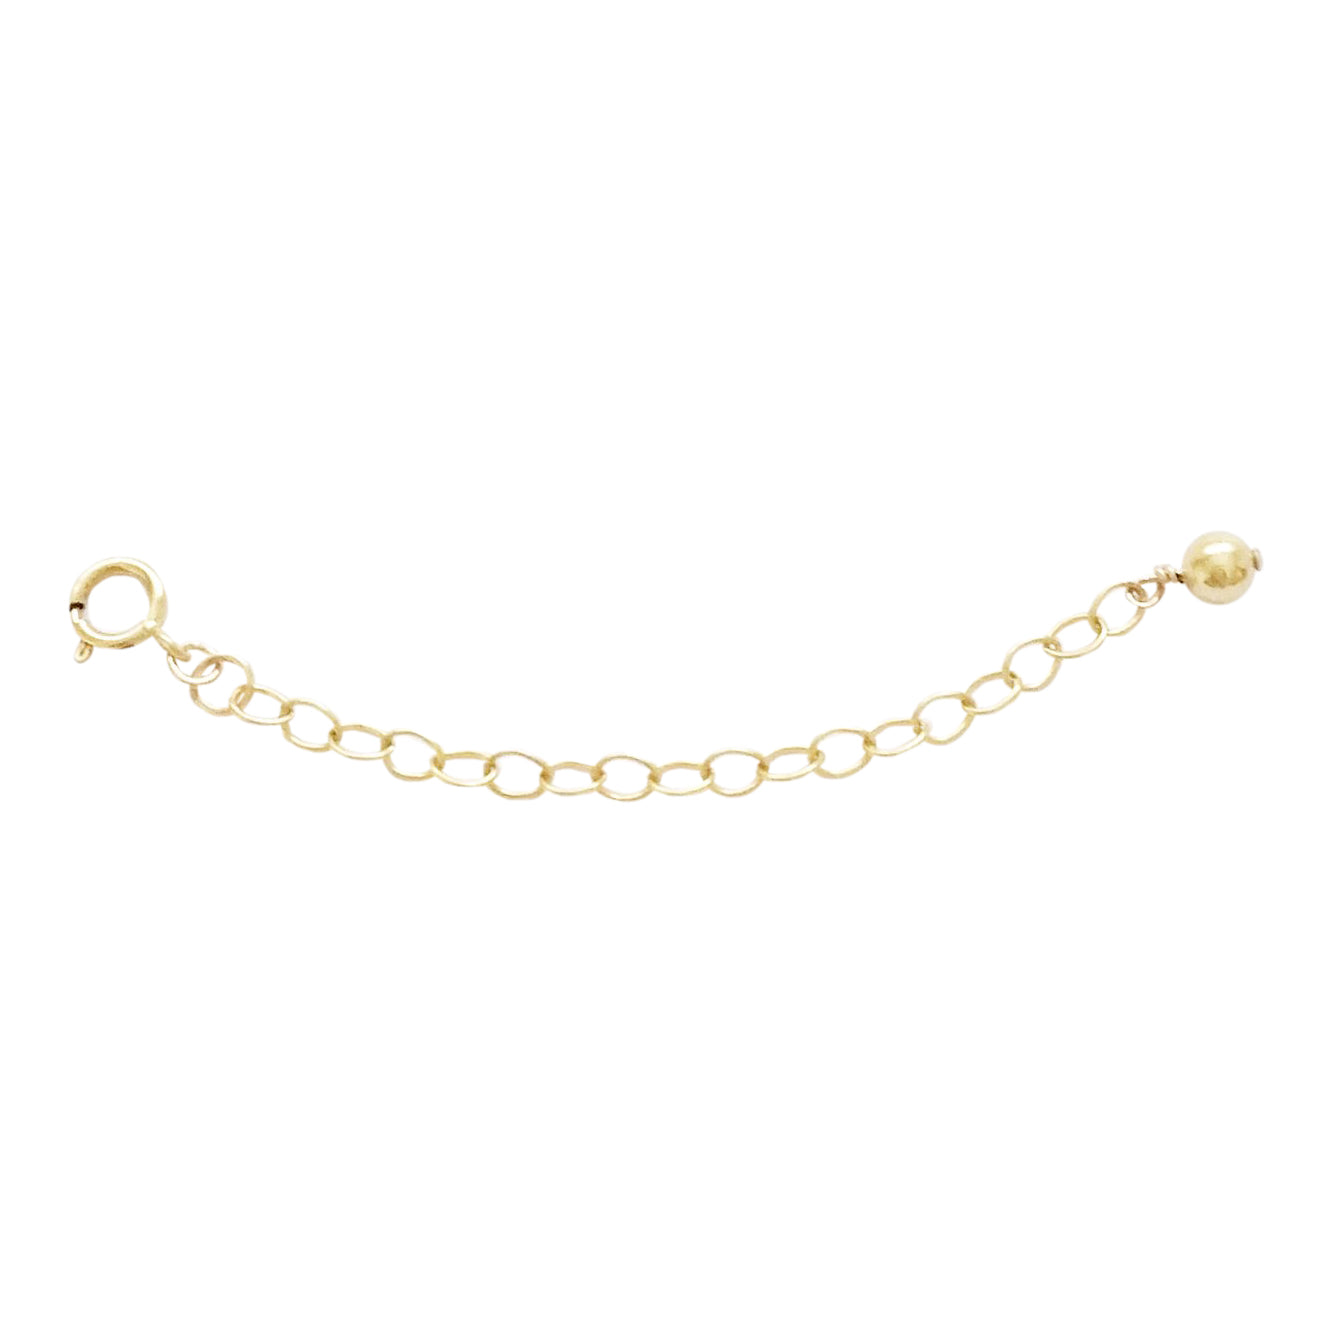 Lat & Lo chain extender for 2 inches of adjustable length, 14K gold filled or sterling silver